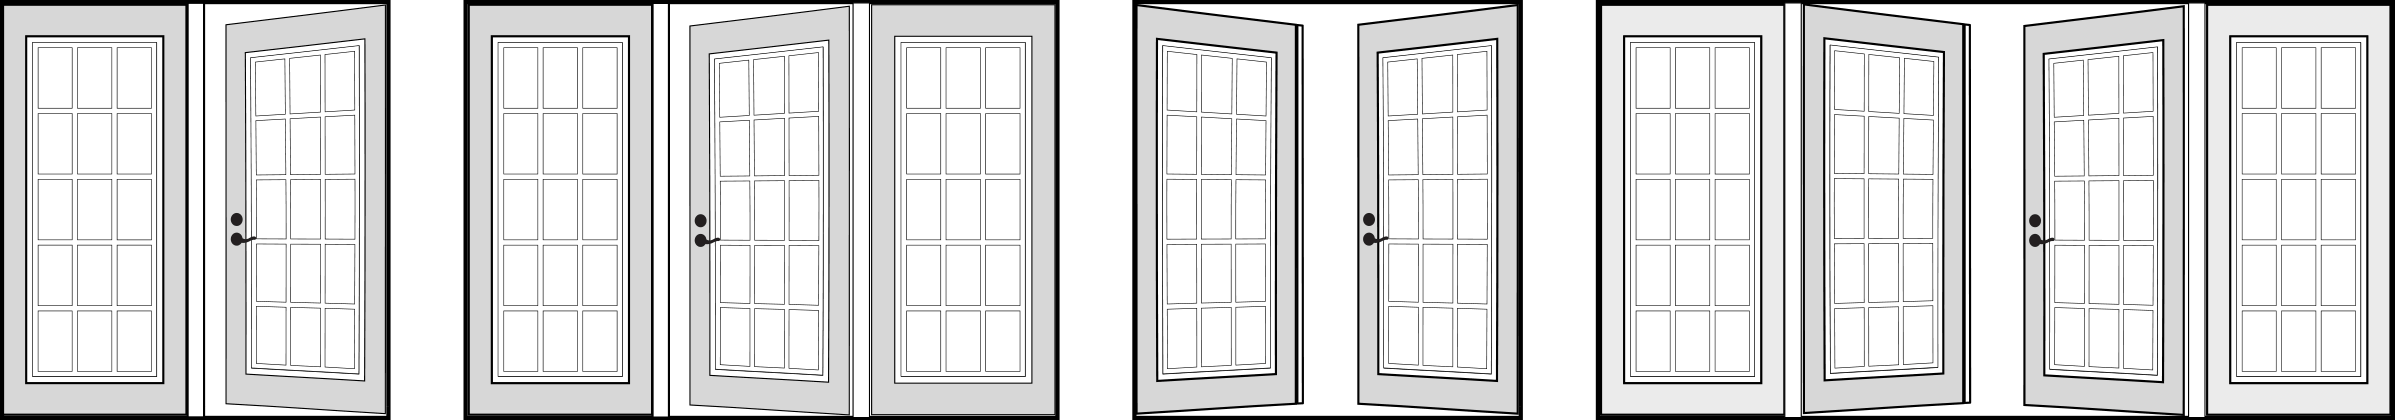 A look at the different garden door configurations offered by Consumer's Choice Window & Doors